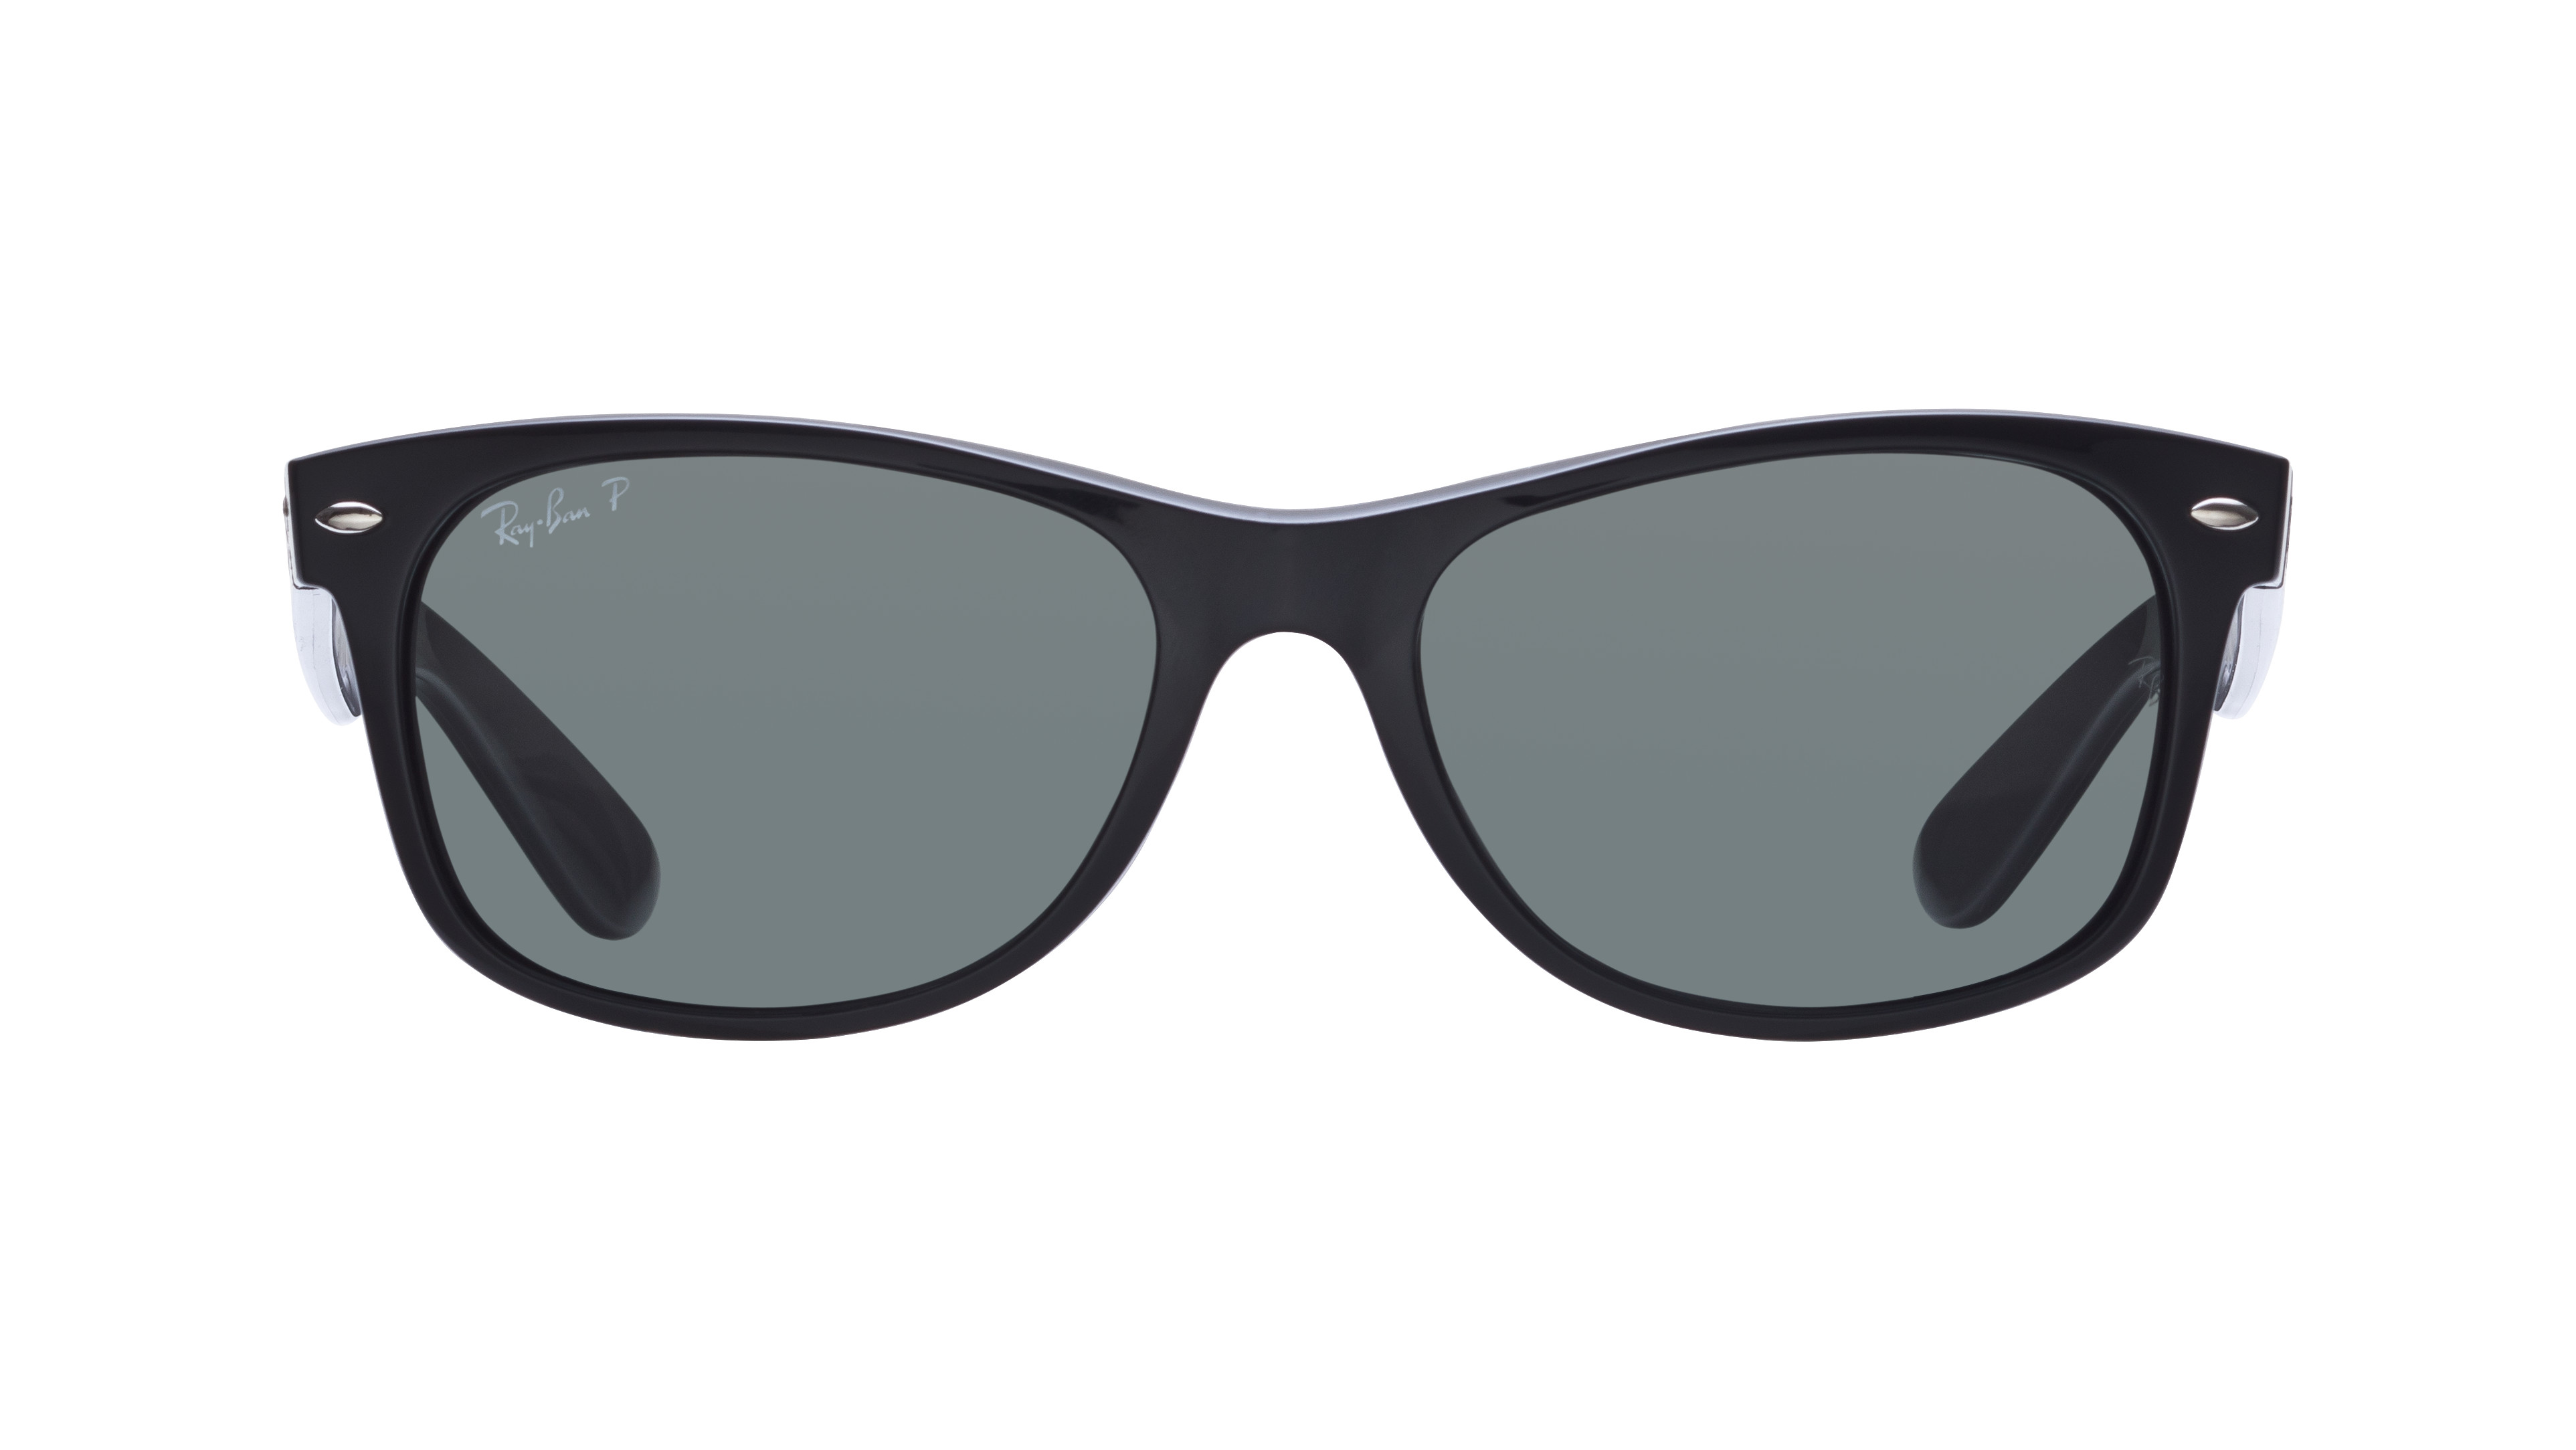 [products.image.front] Ray-Ban New Wayfarer 0RB2132 901/58 Sonnenbrille